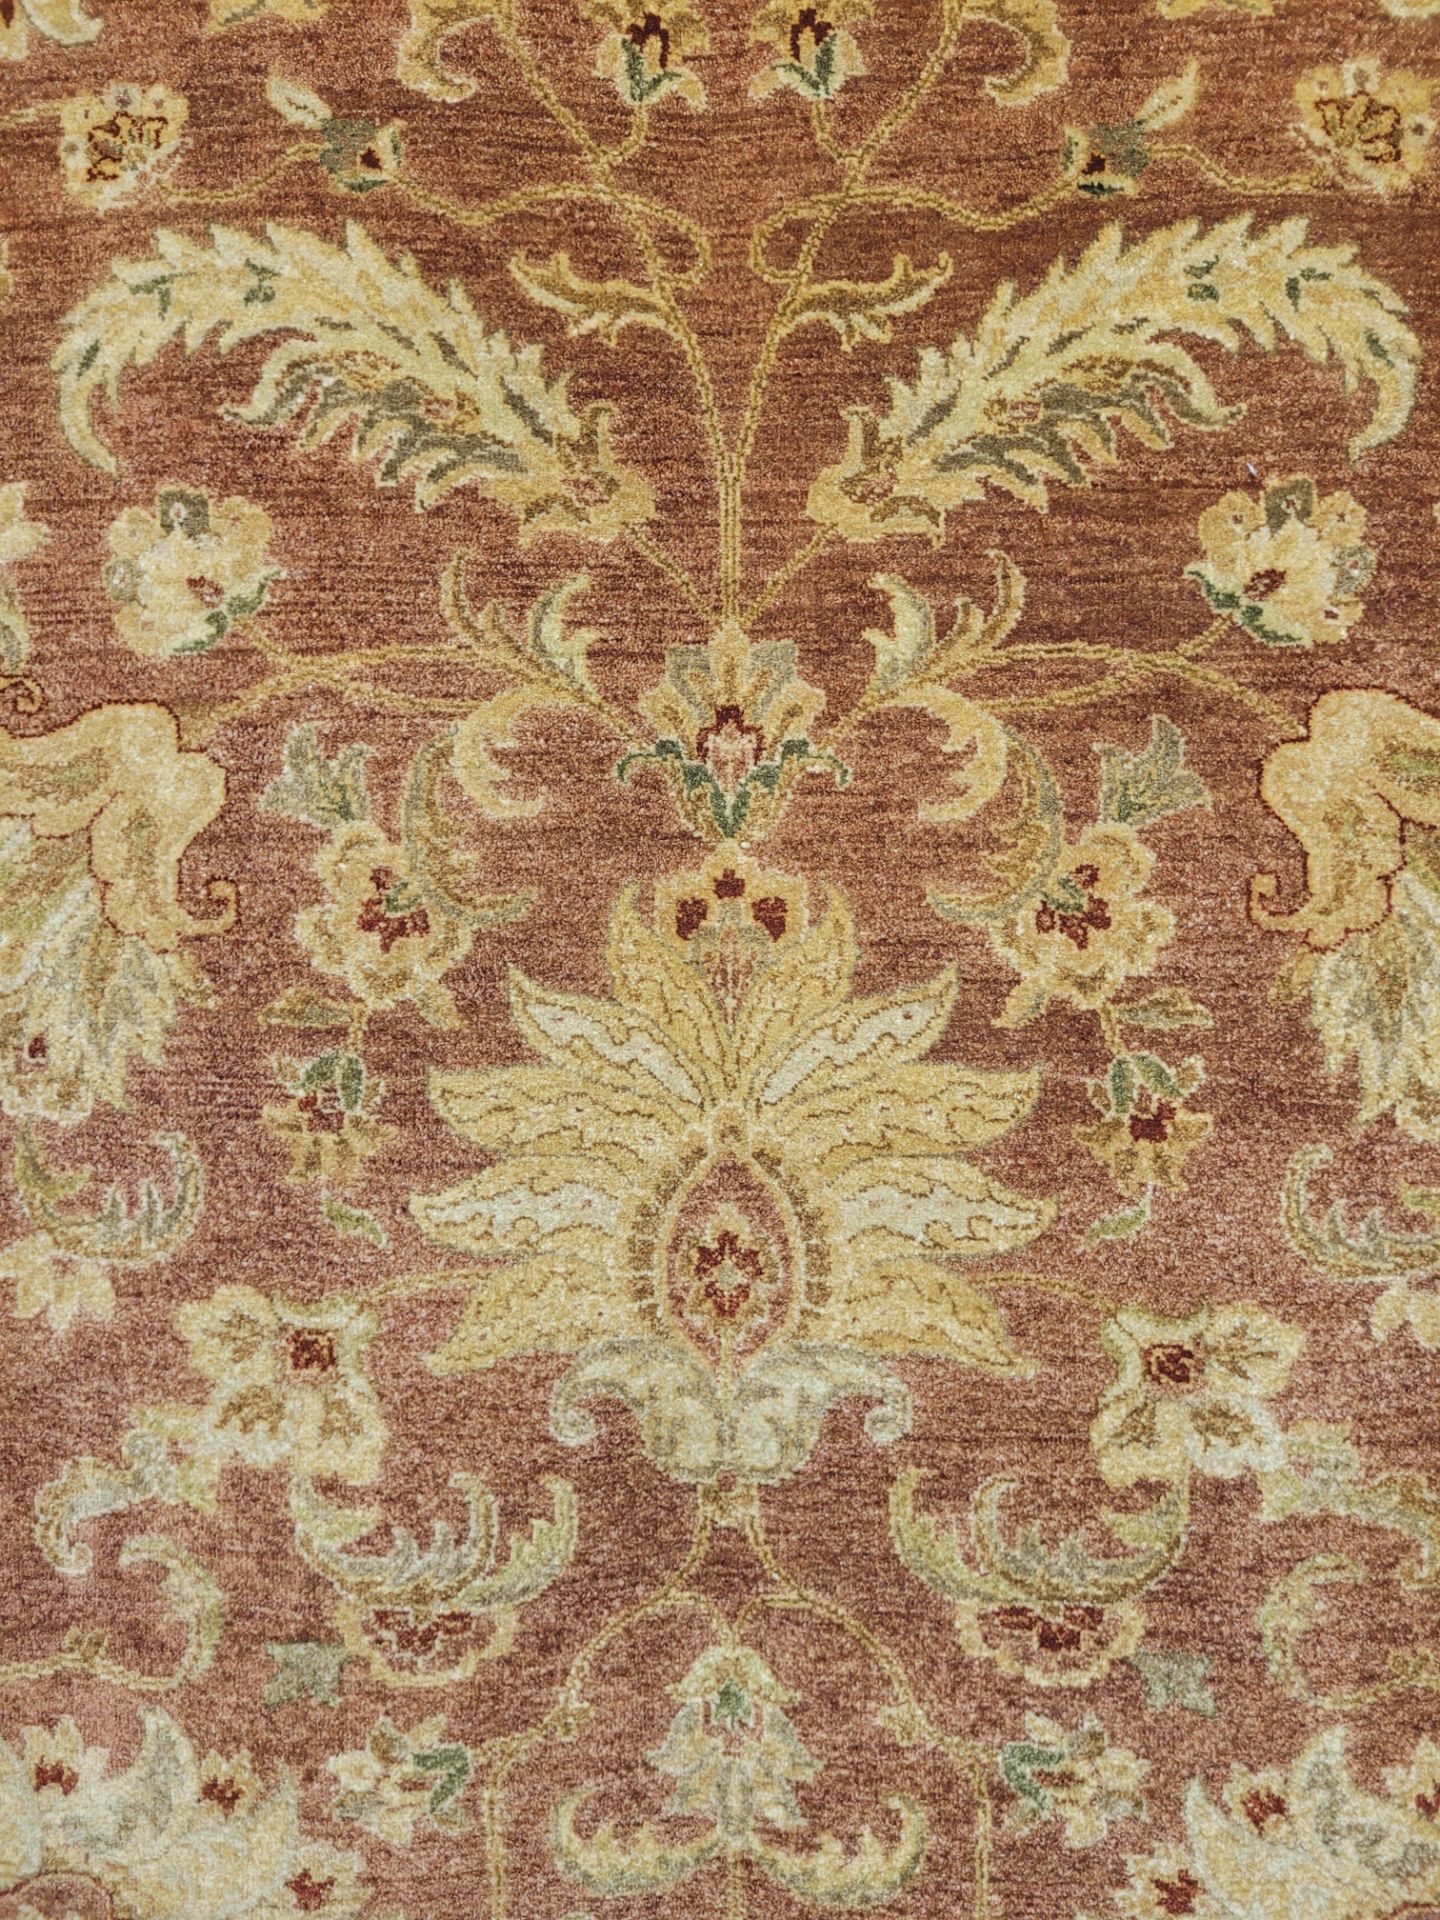 8'10" X 11'10" RUBY RED/WHE - 100% FINE WOOL PILE HAND KNOTTED IN INDIA - MSRP $11,337.00 (LOCATED - Image 5 of 10